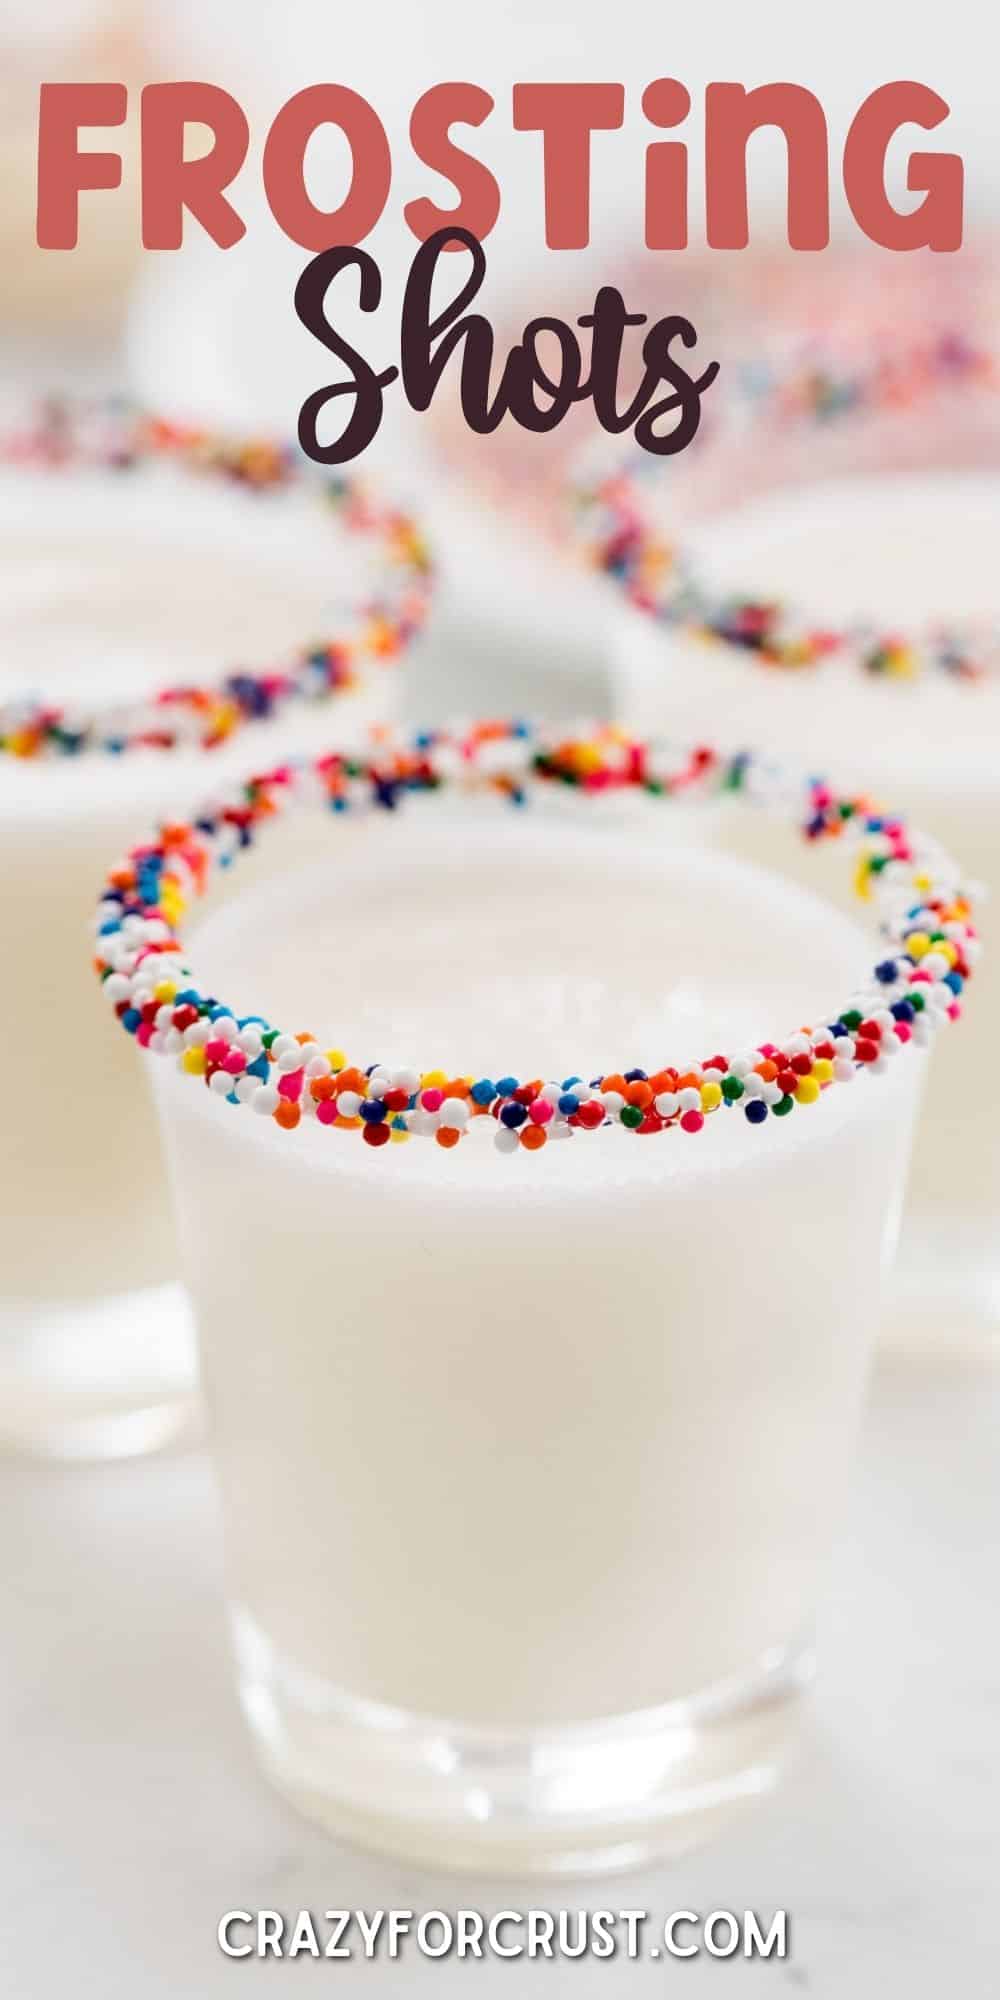 shot glass with drink and rimmed with sprinkles